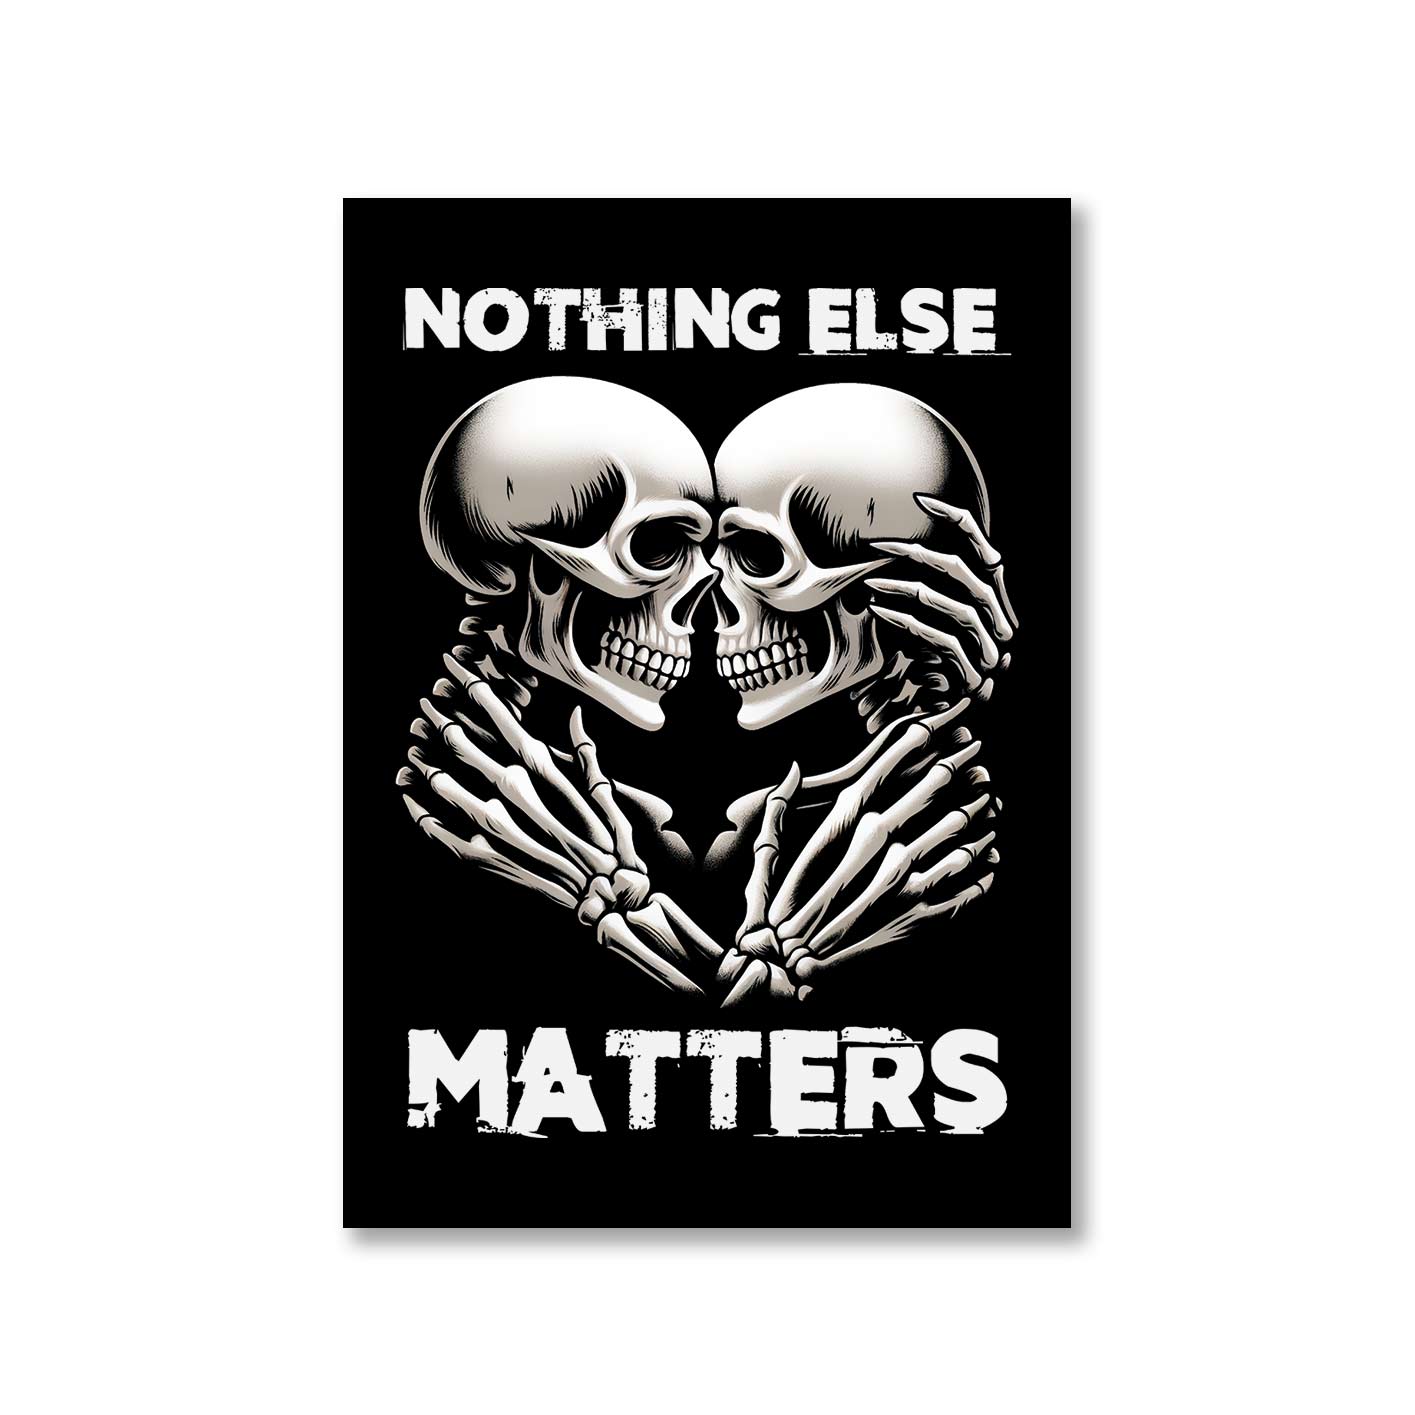 metallica and nothing else matters poster wall art buy online india the banyan tee tbt a4 